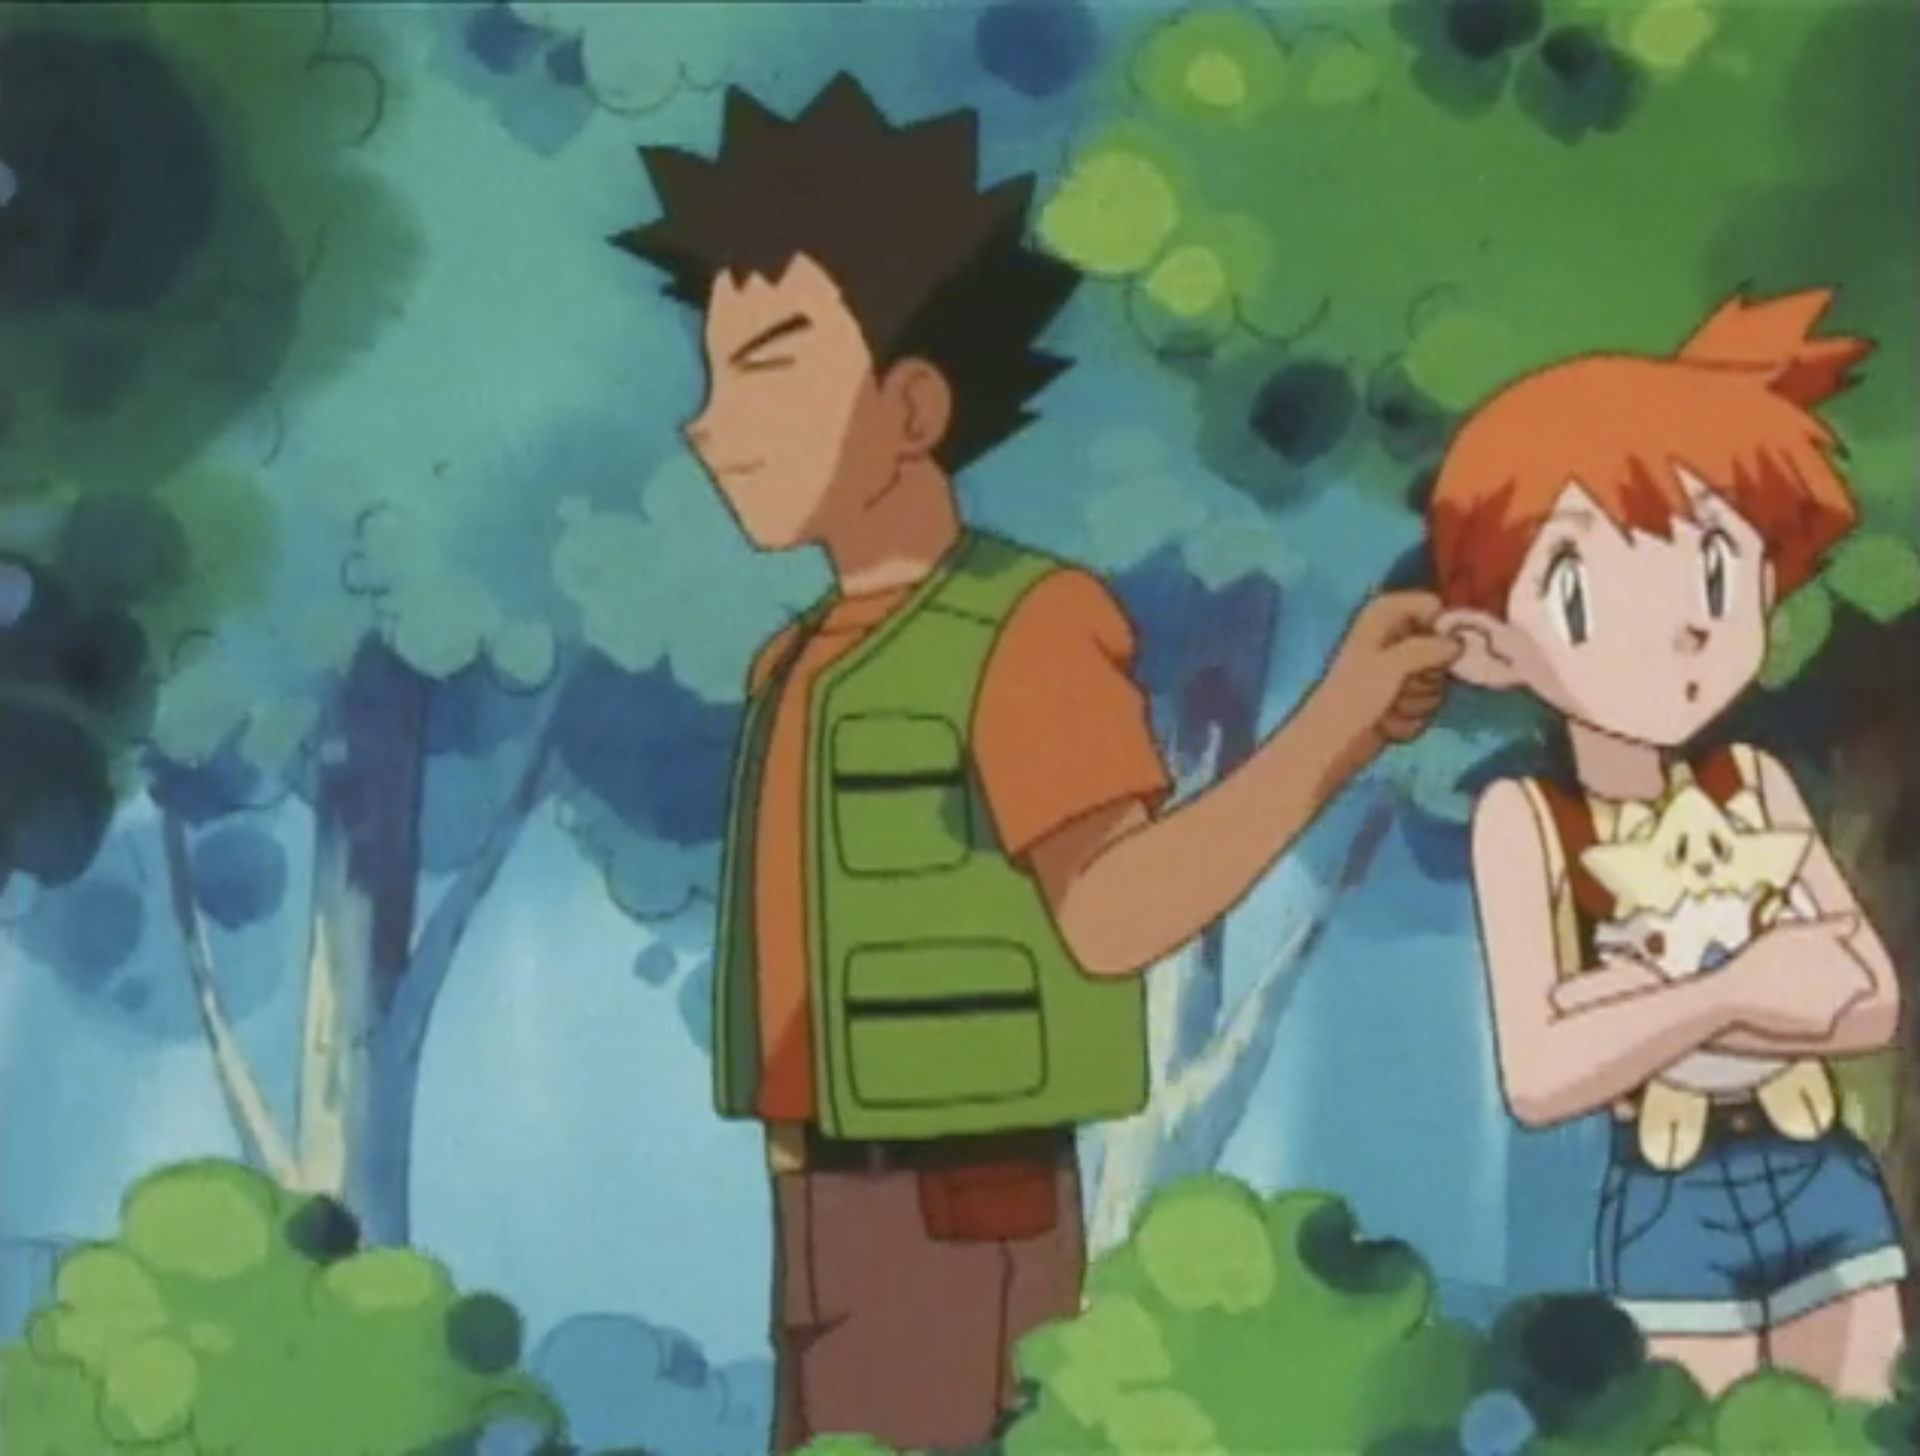 Brock and Misty will make a triumphant comeback in the Pokémon TV show   Mashable